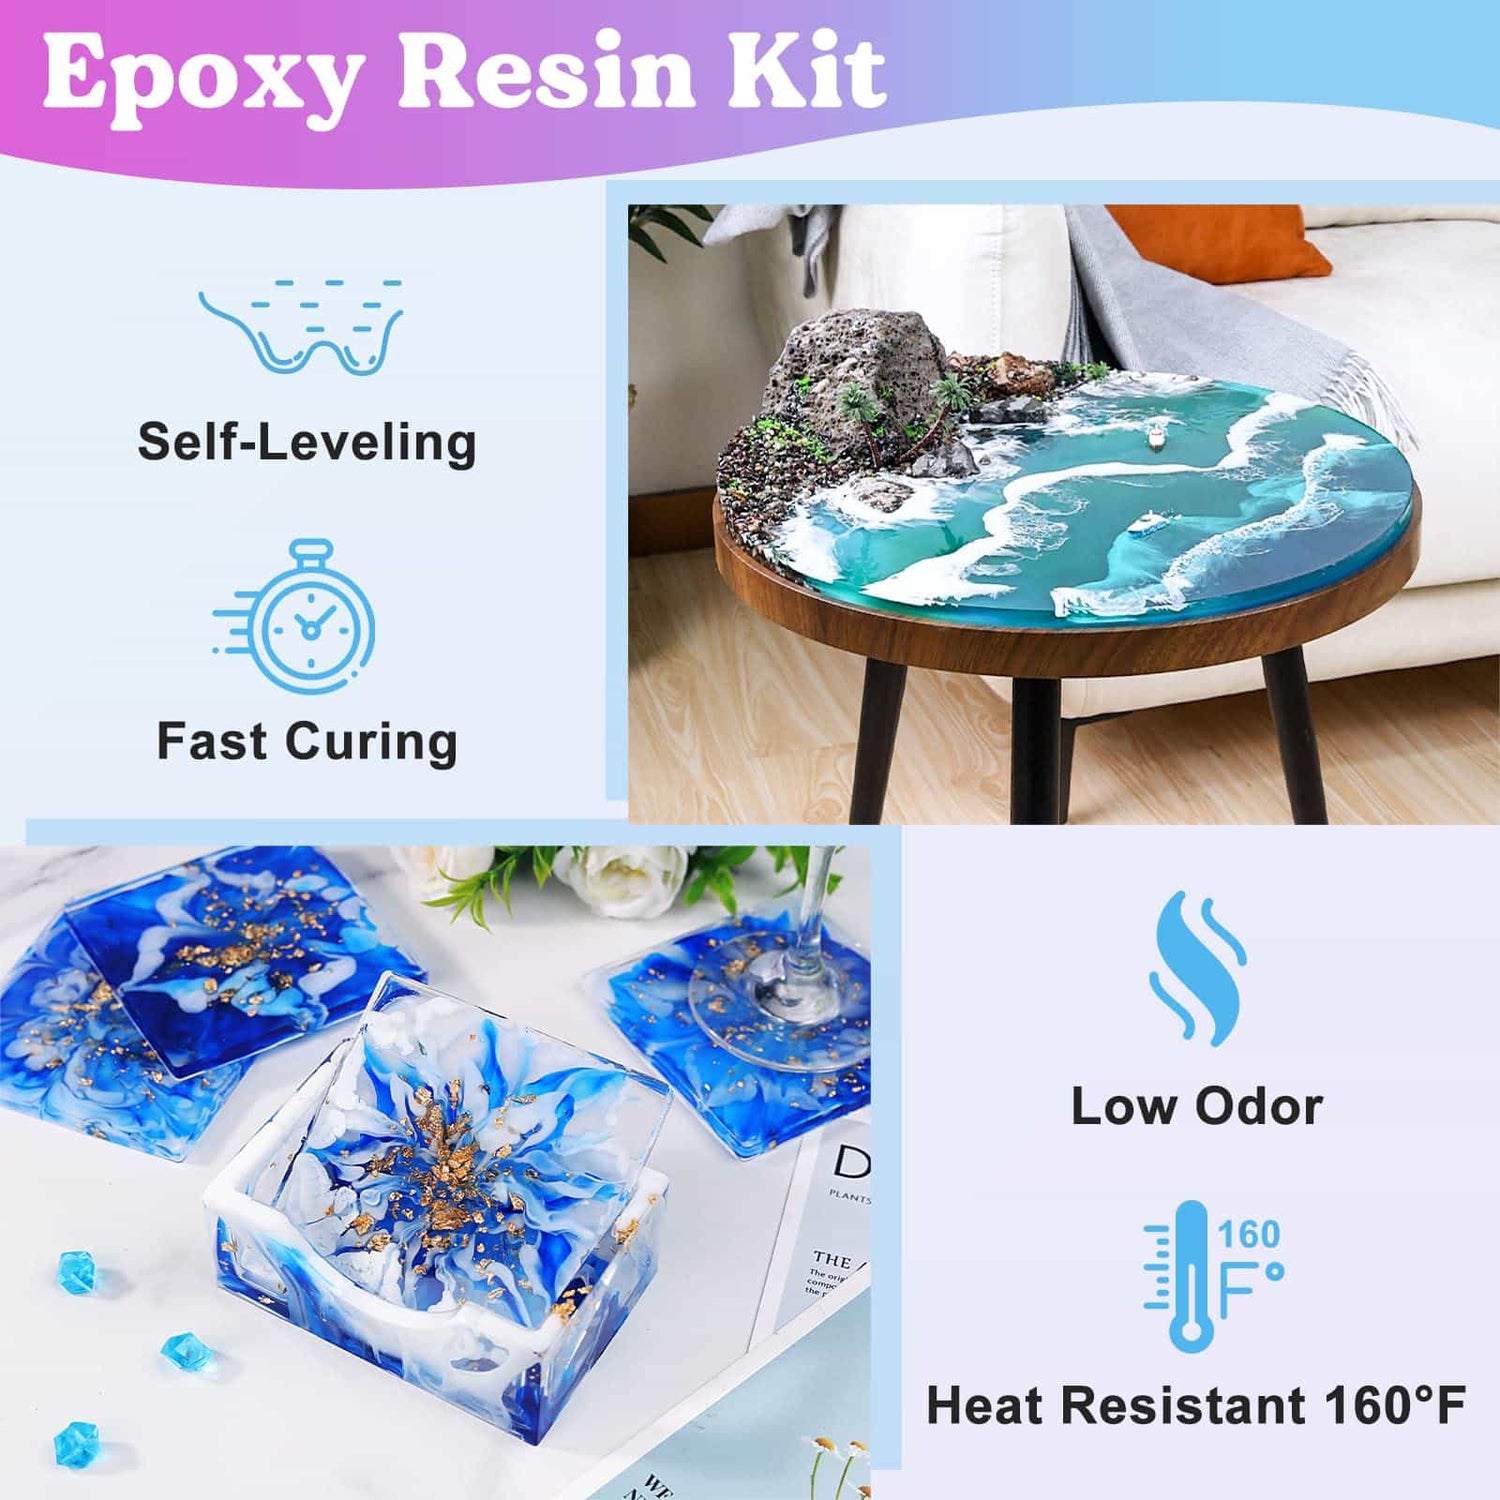 64 oz Epoxy Resin - Super Clear,Bubbles Free,Casting,Table Top – Let's Resin